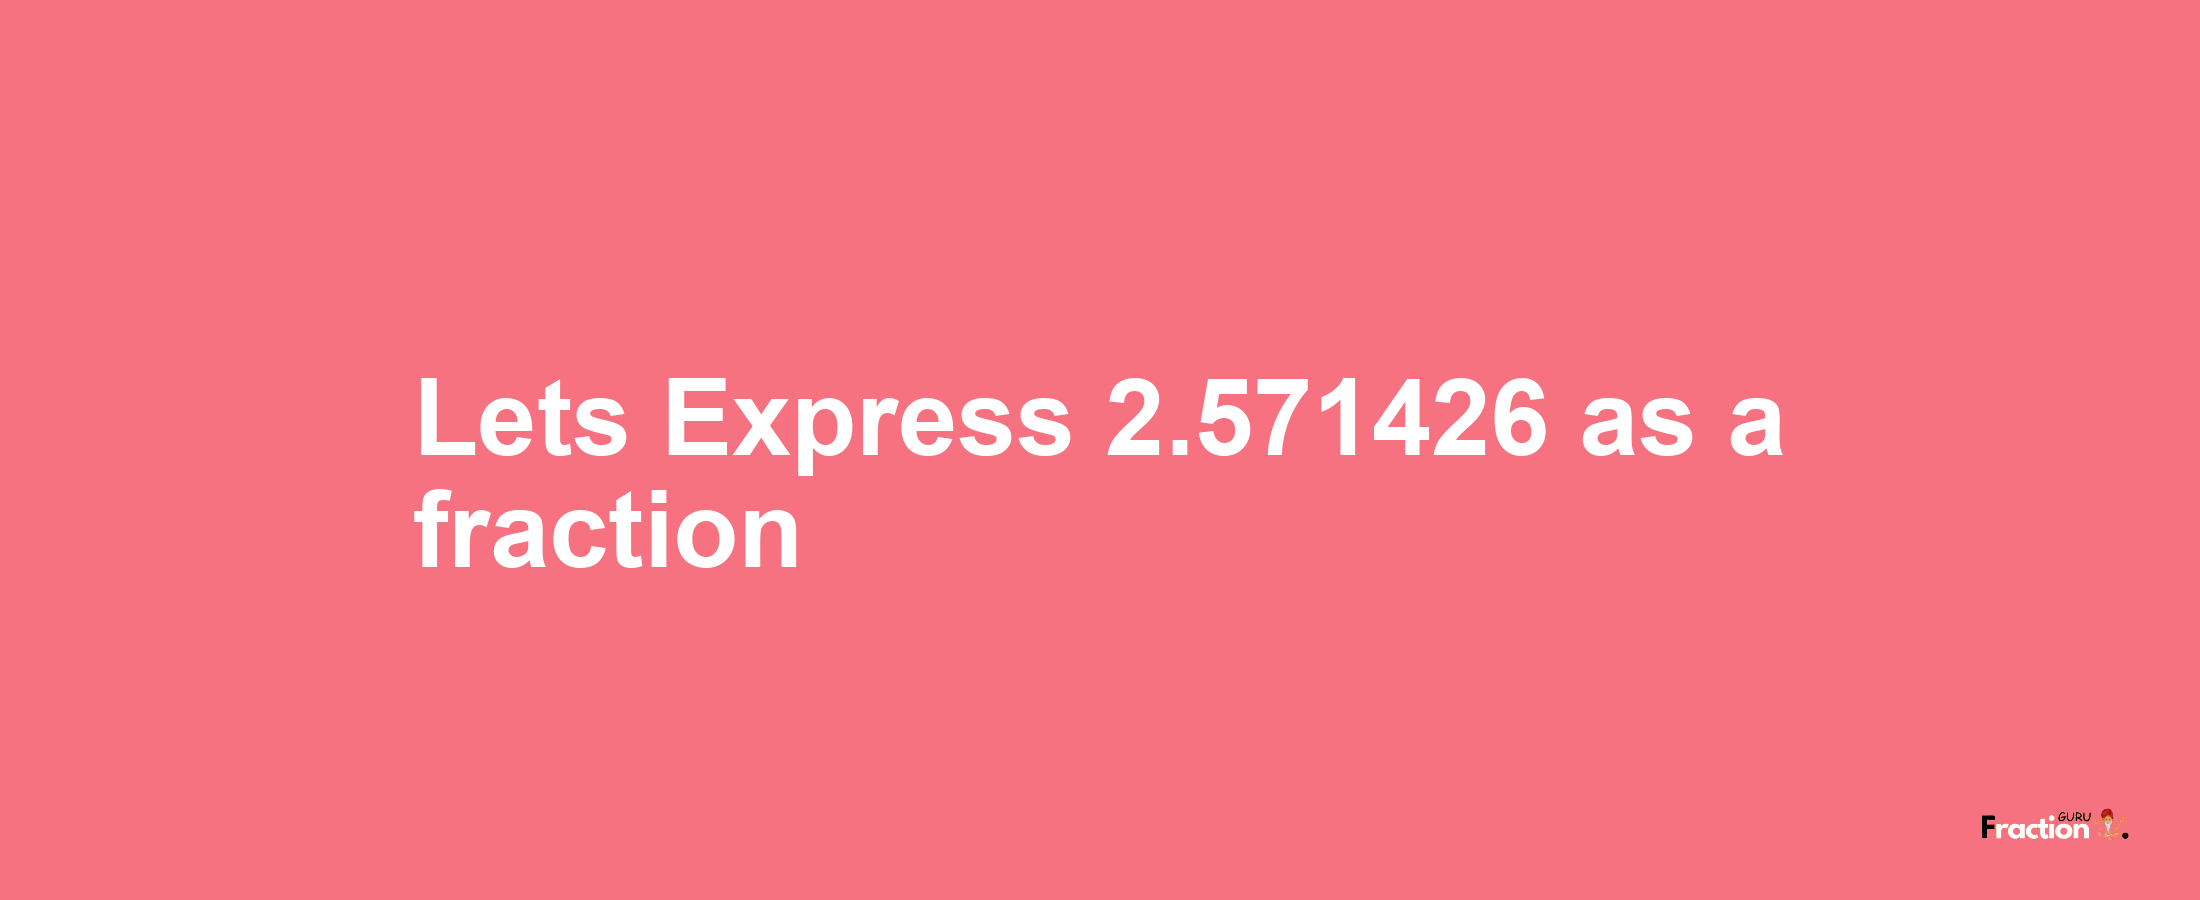 Lets Express 2.571426 as afraction